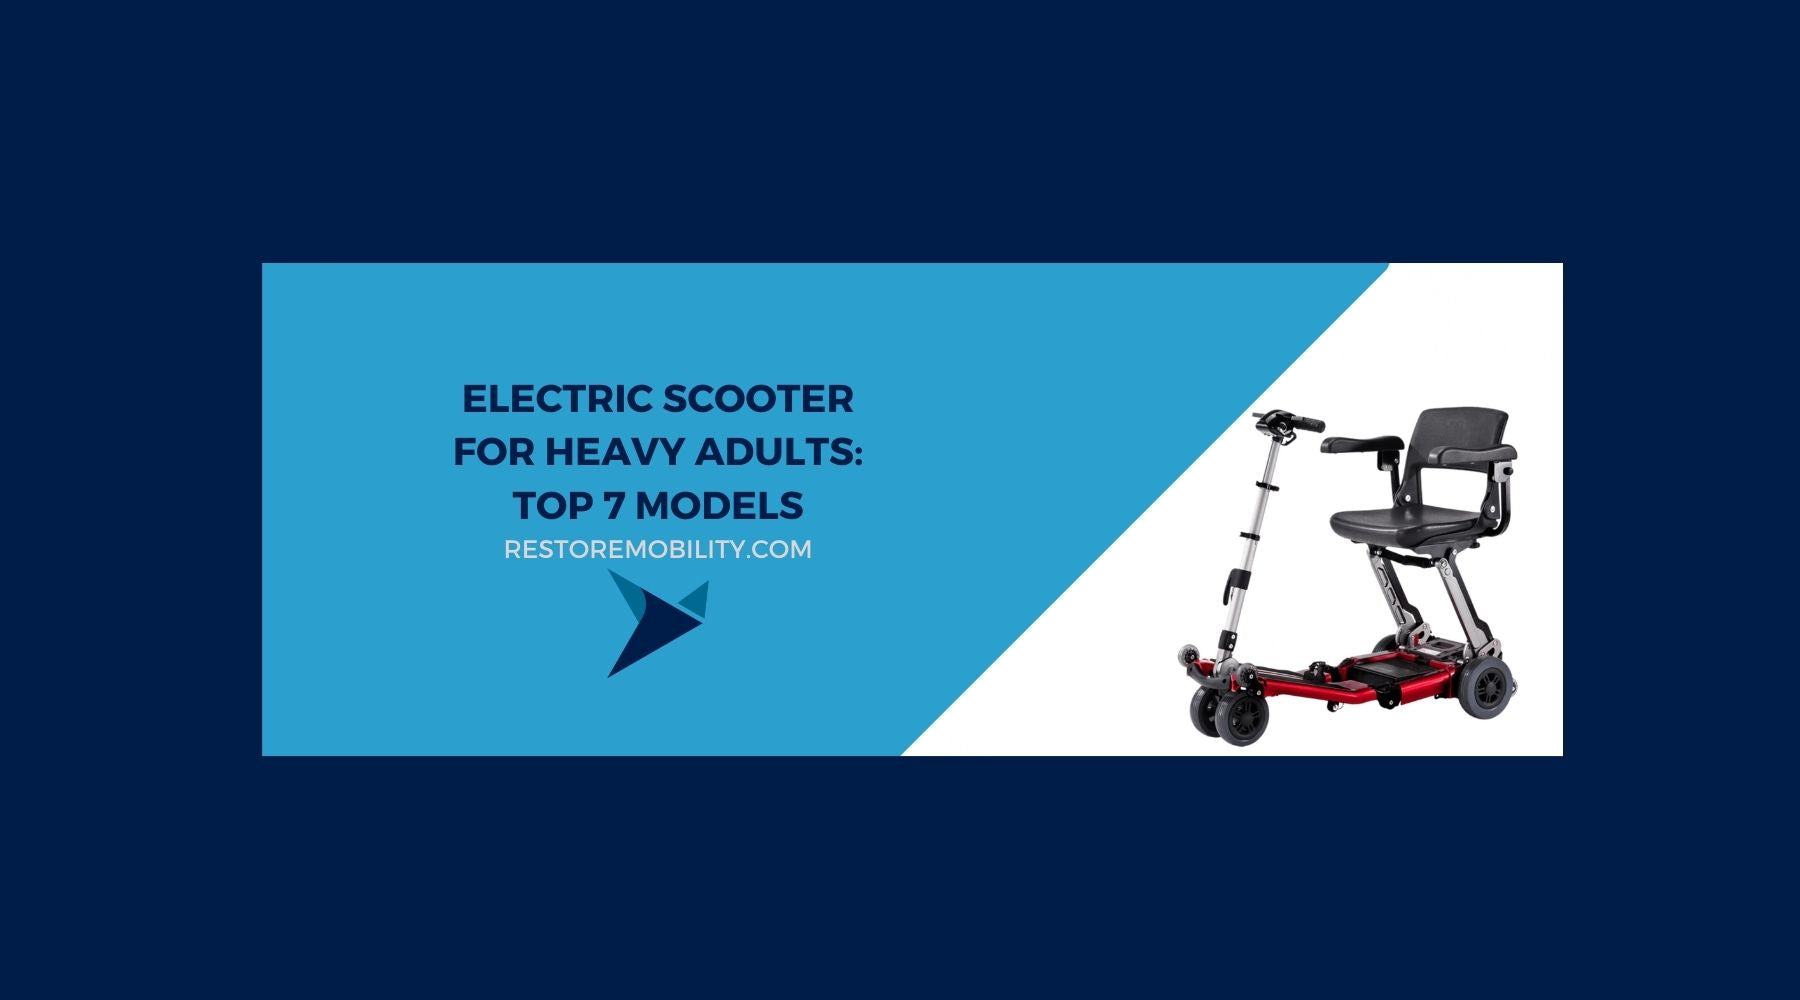 Electric Scooter for Heavy Adults: Top 7 Models